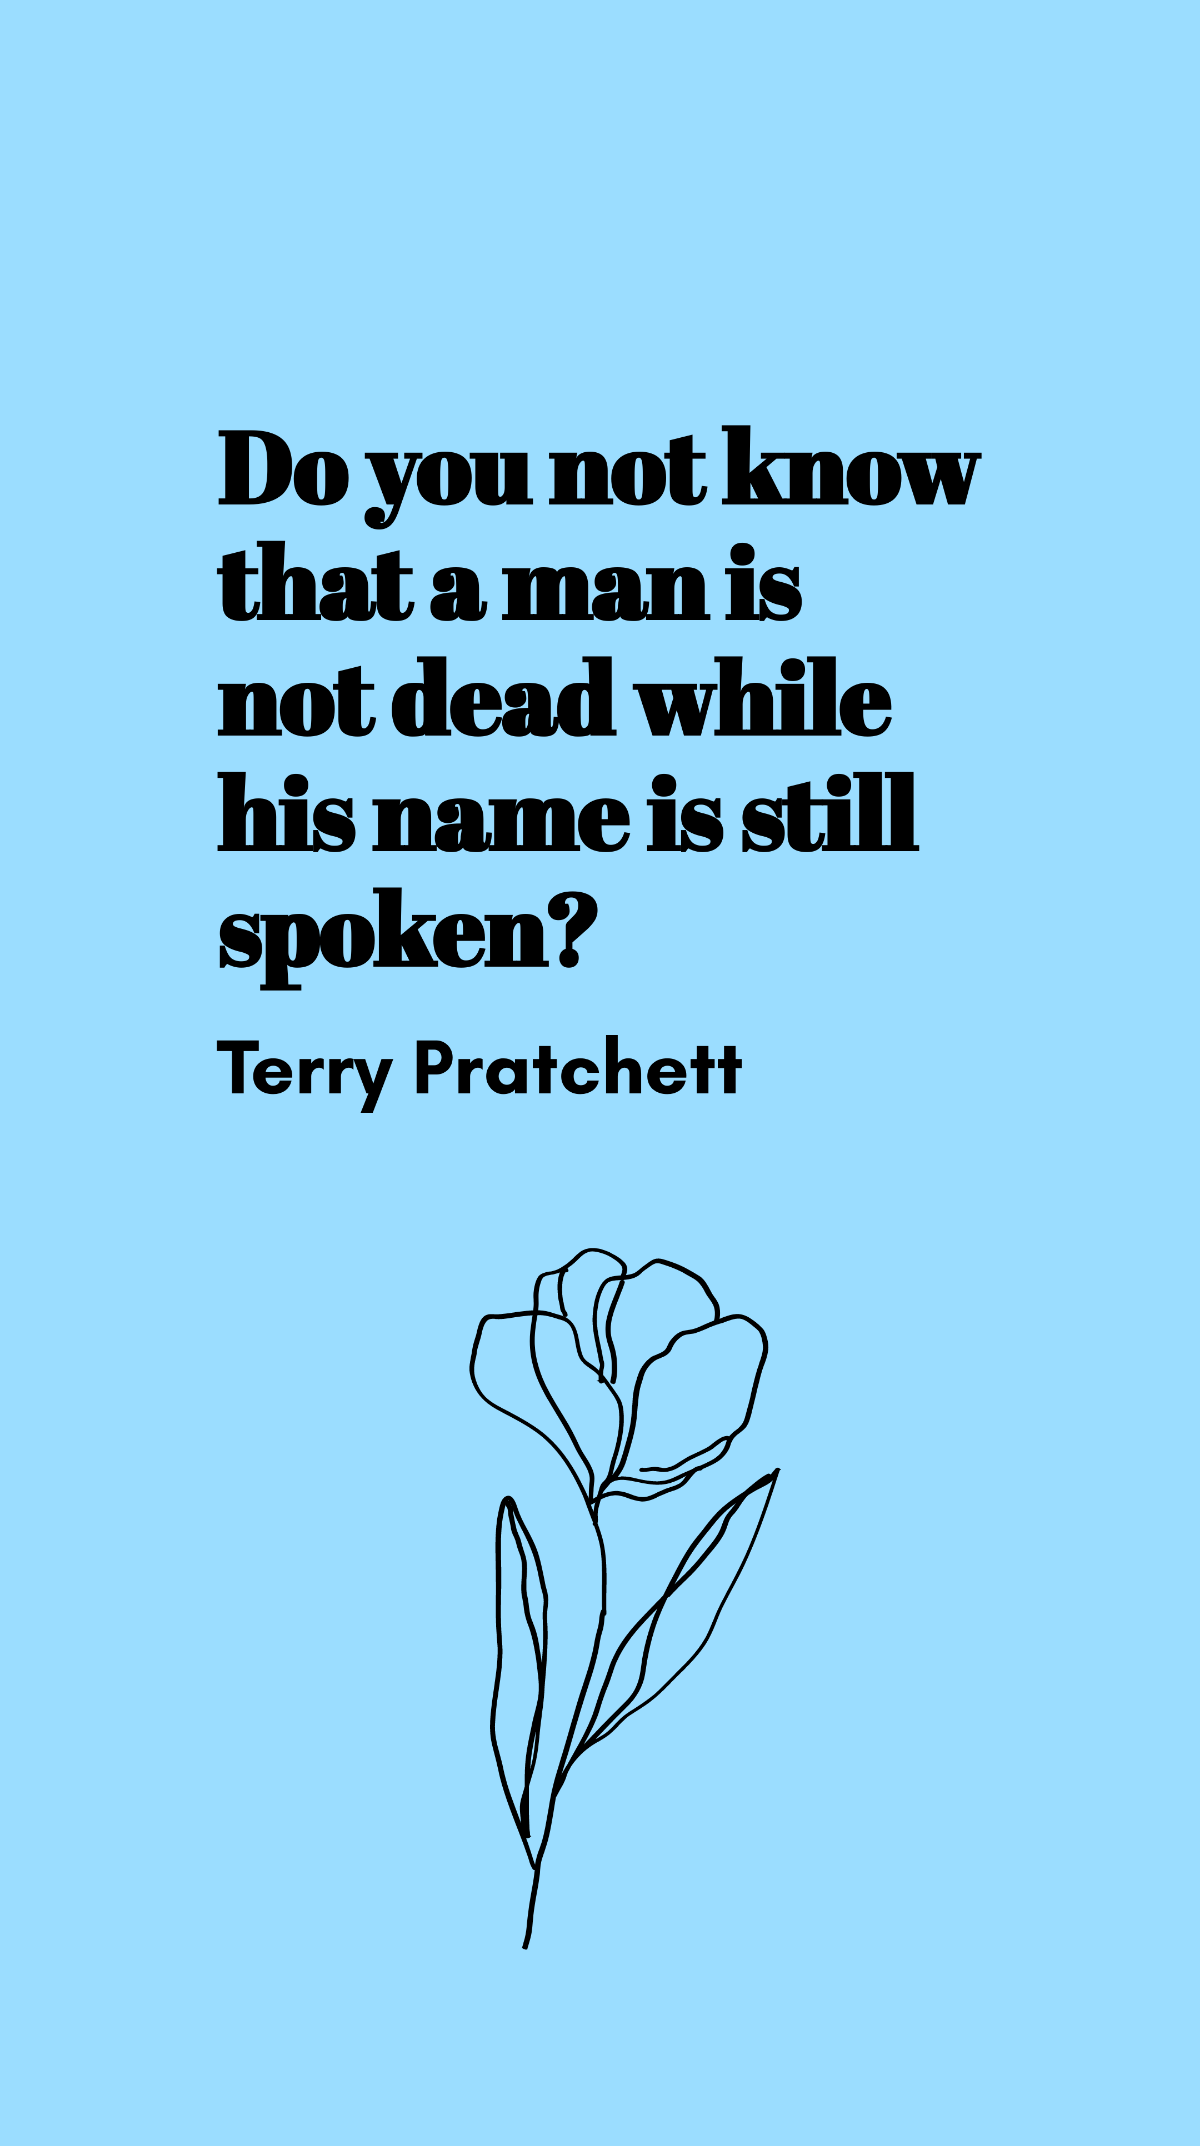 Terry Pratchett - Do you not know that a man is not dead while his name is still spoken? Template